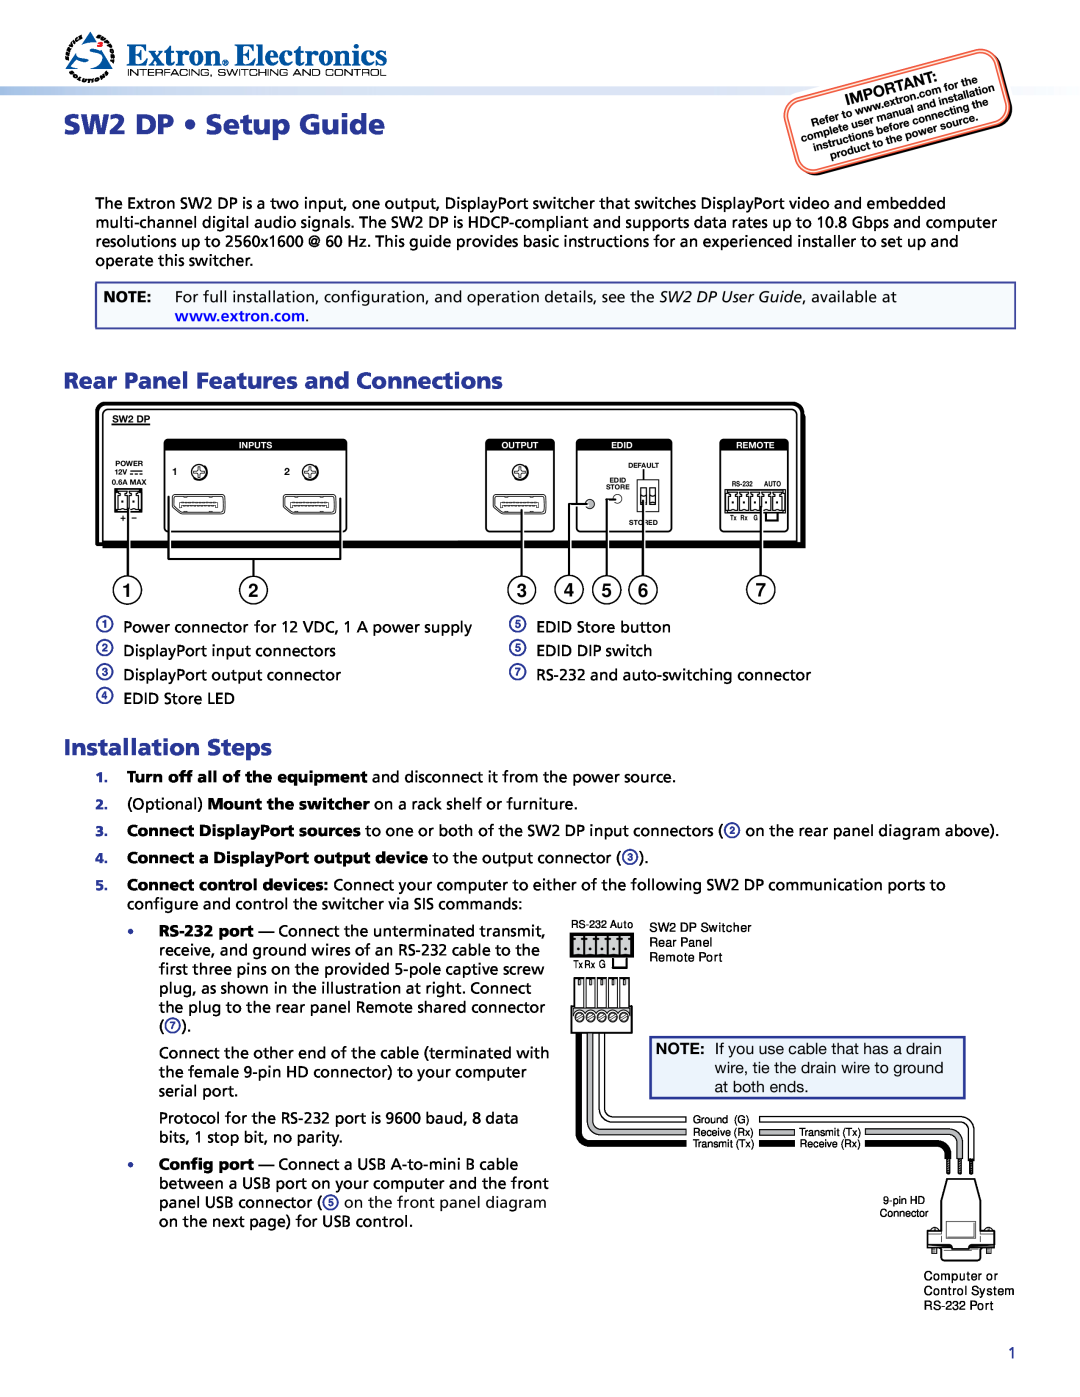 Extron electronic setup guide Rear Panel Features and Connections, Installation Steps, SW2 DP Setup Guide 